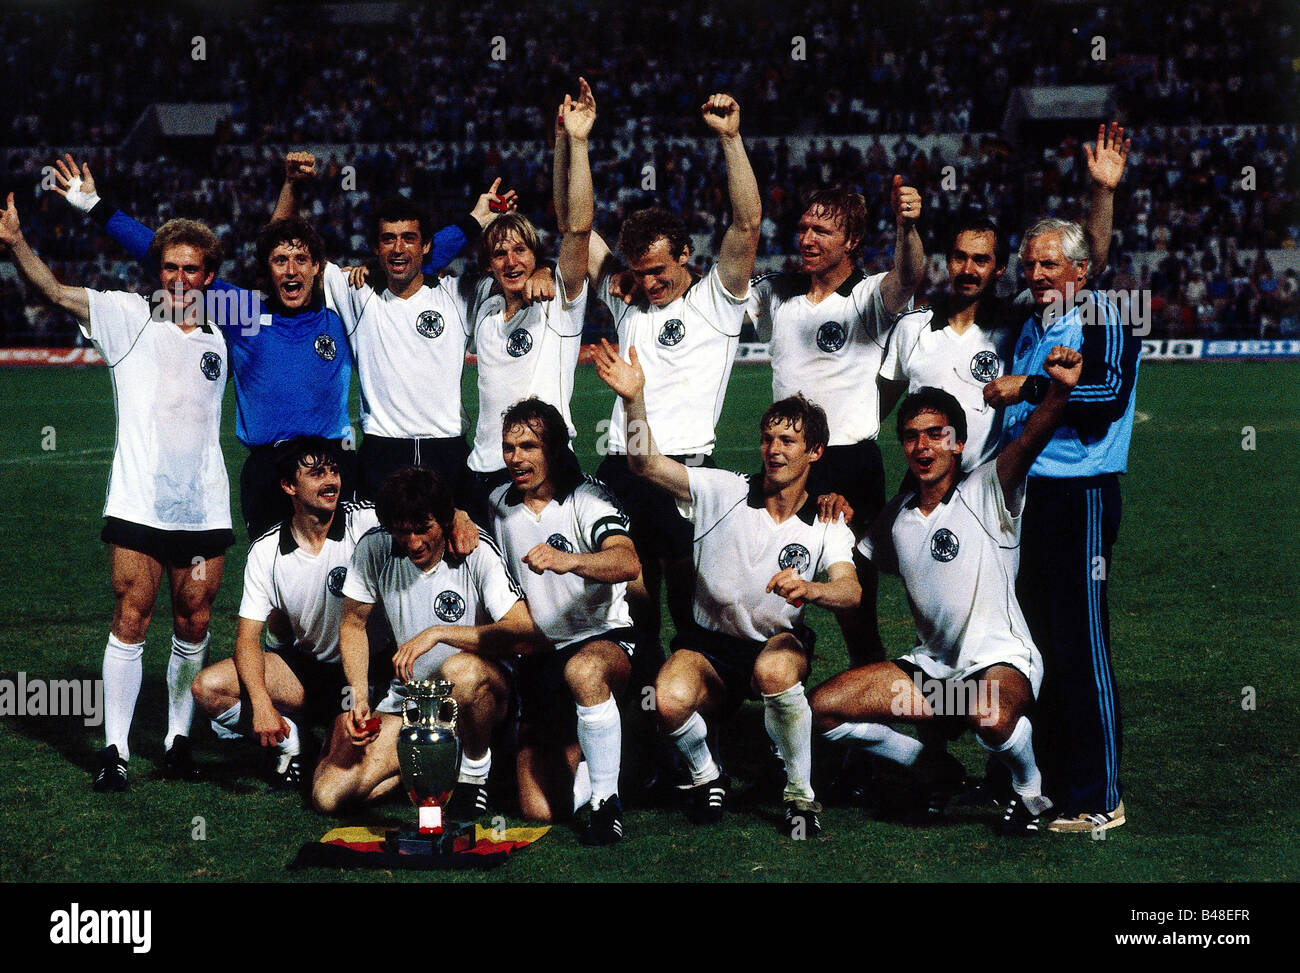 Sport / Sports, soccer, football, European championship, EURO 1980, German national team, group picture with cup, final against Belgium, 2:1 (1:0), Rome, Italy, 22.6.1980, Europe, championships, final round, victory, winner, winner, cup-winners, match, historic, historical, 20th century, people, 1980s, Stock Photo